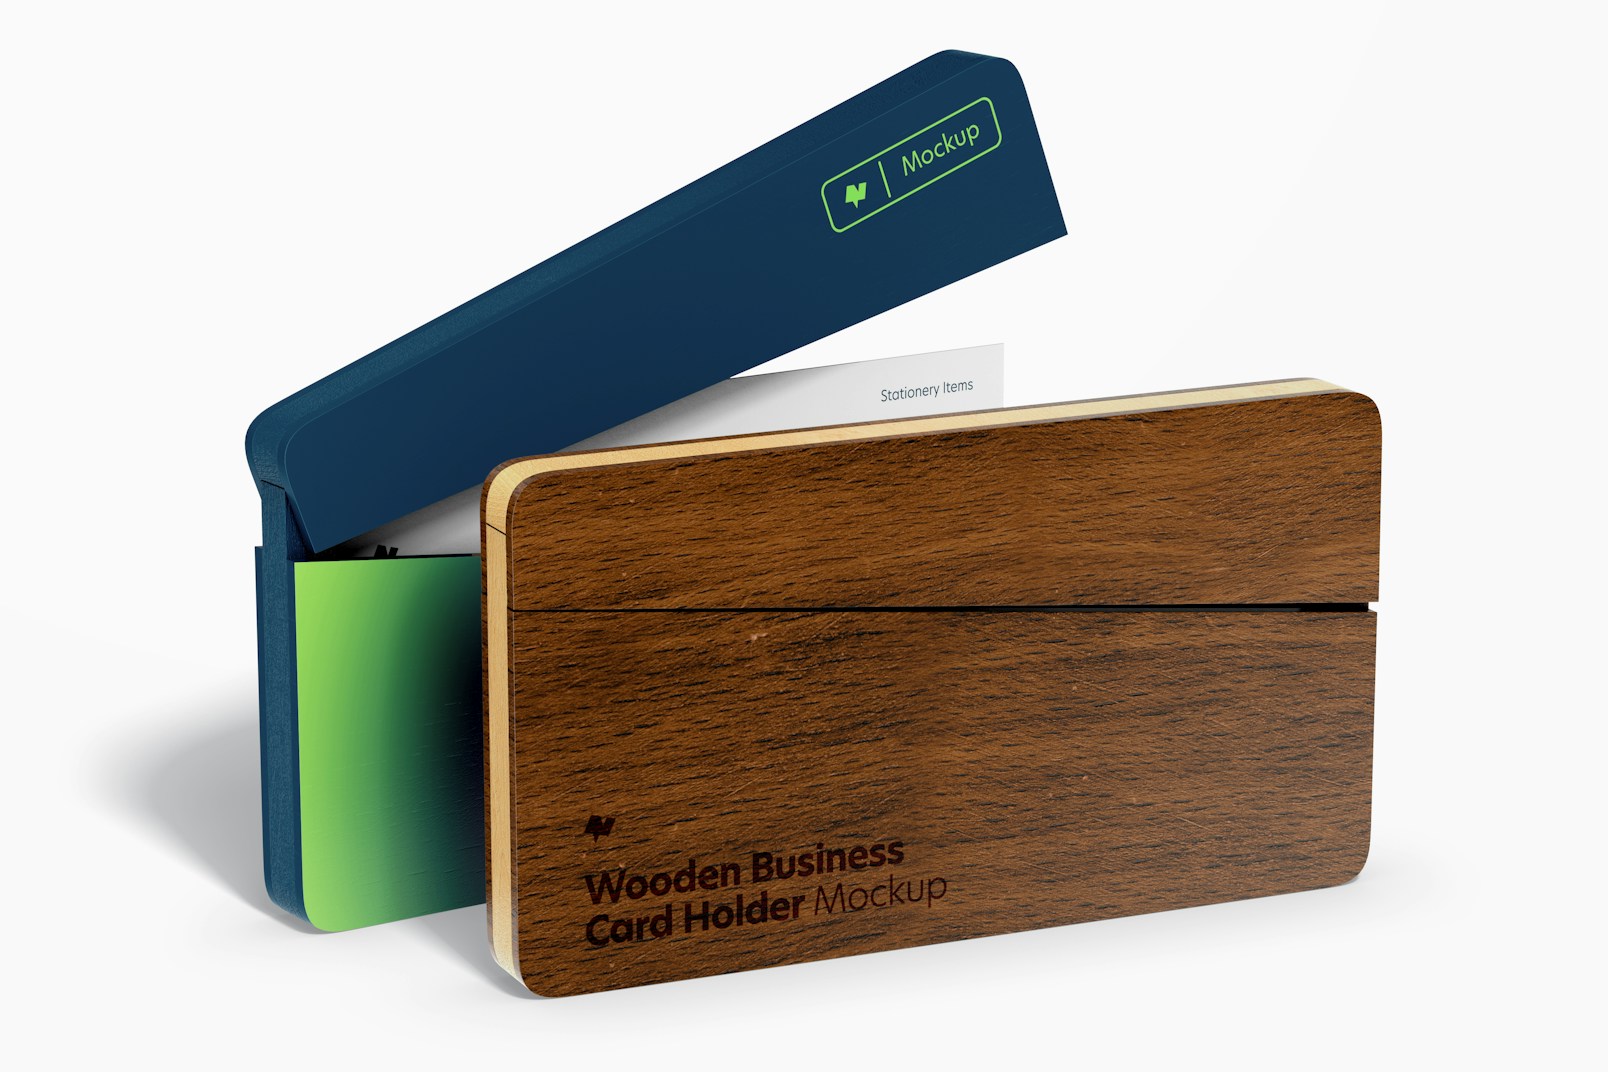 Wooden Business Card Holders Mockup, Perspective